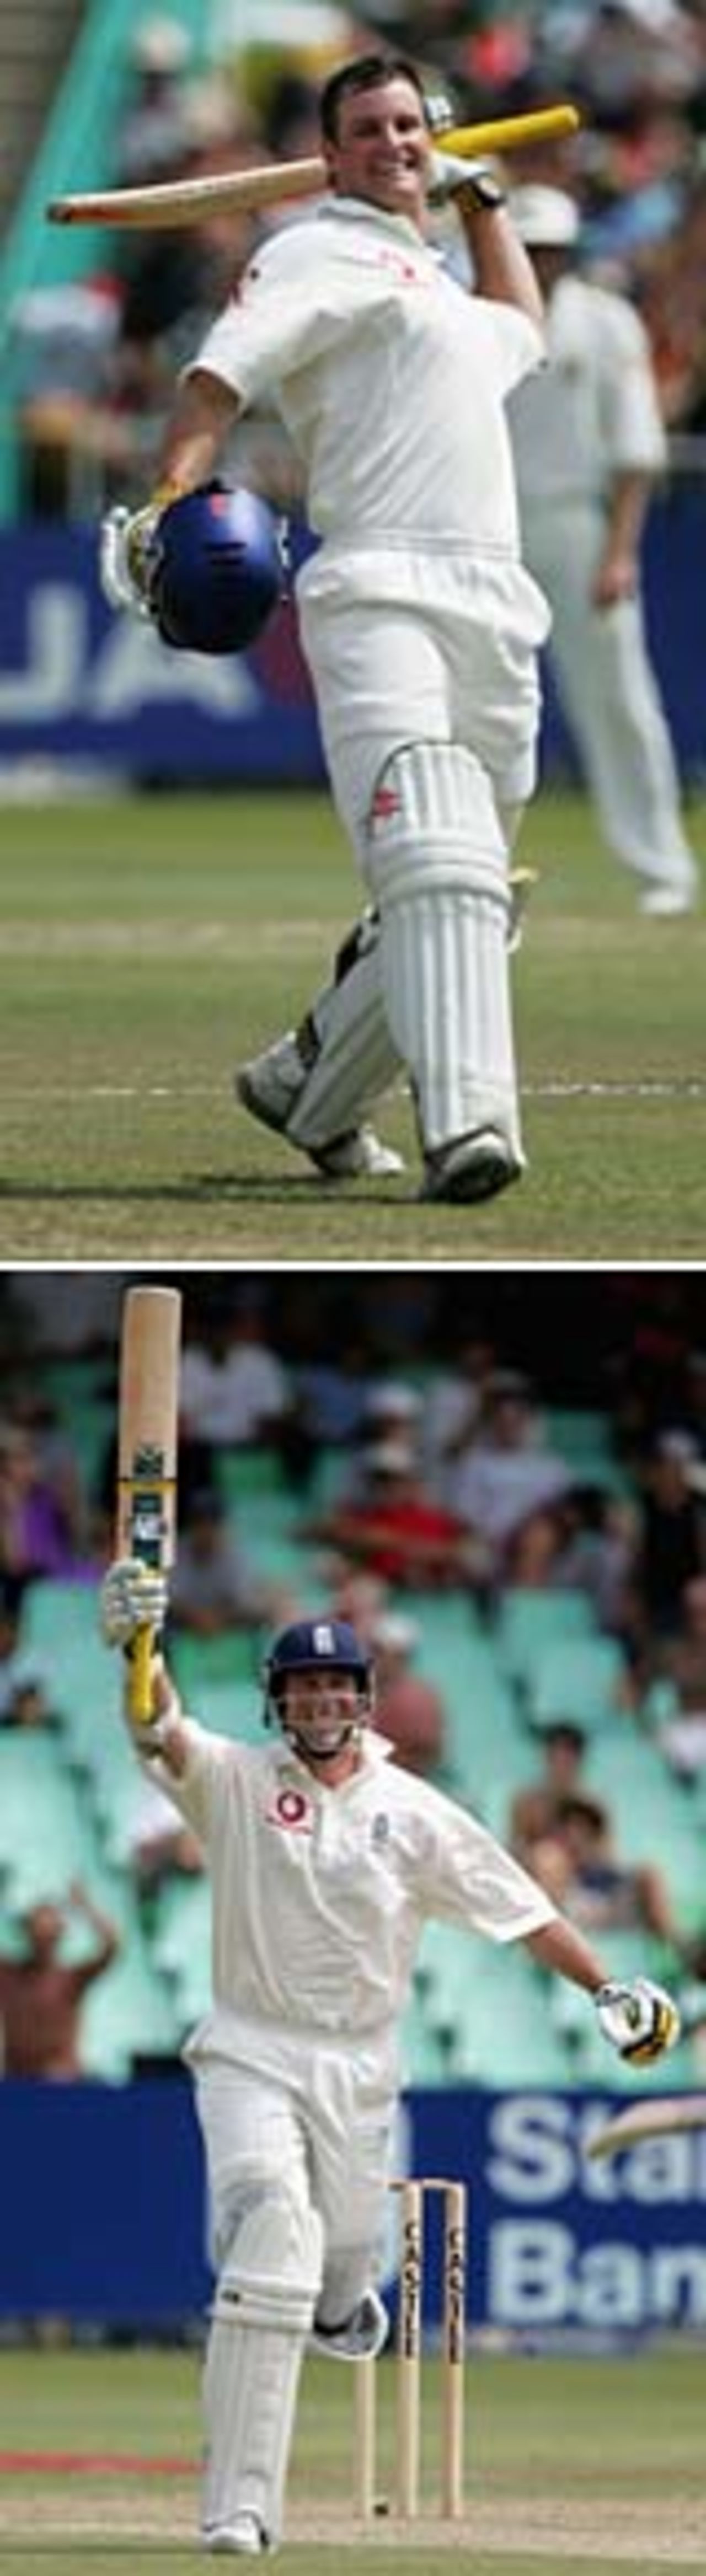 Hundreds for Andrew Strauss (top) and Marcus Trescothick, South Africa v England, Durban, 2nd Test, December 28, 2004